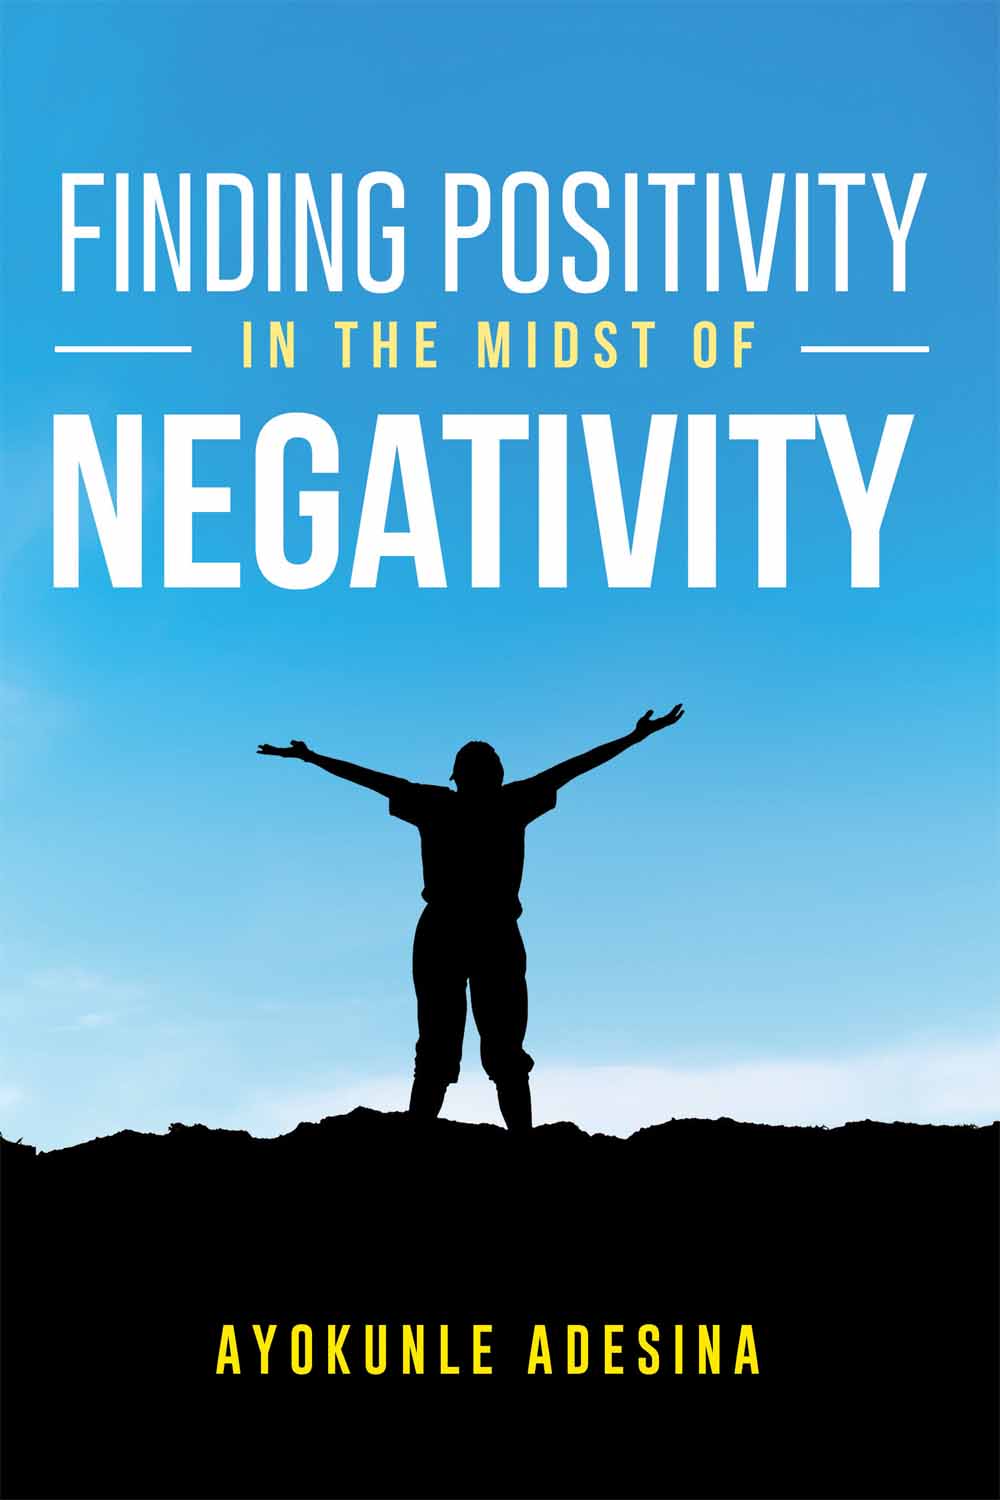 Finding Positivity in the Midst of Negativity by Ayokunle Adesina